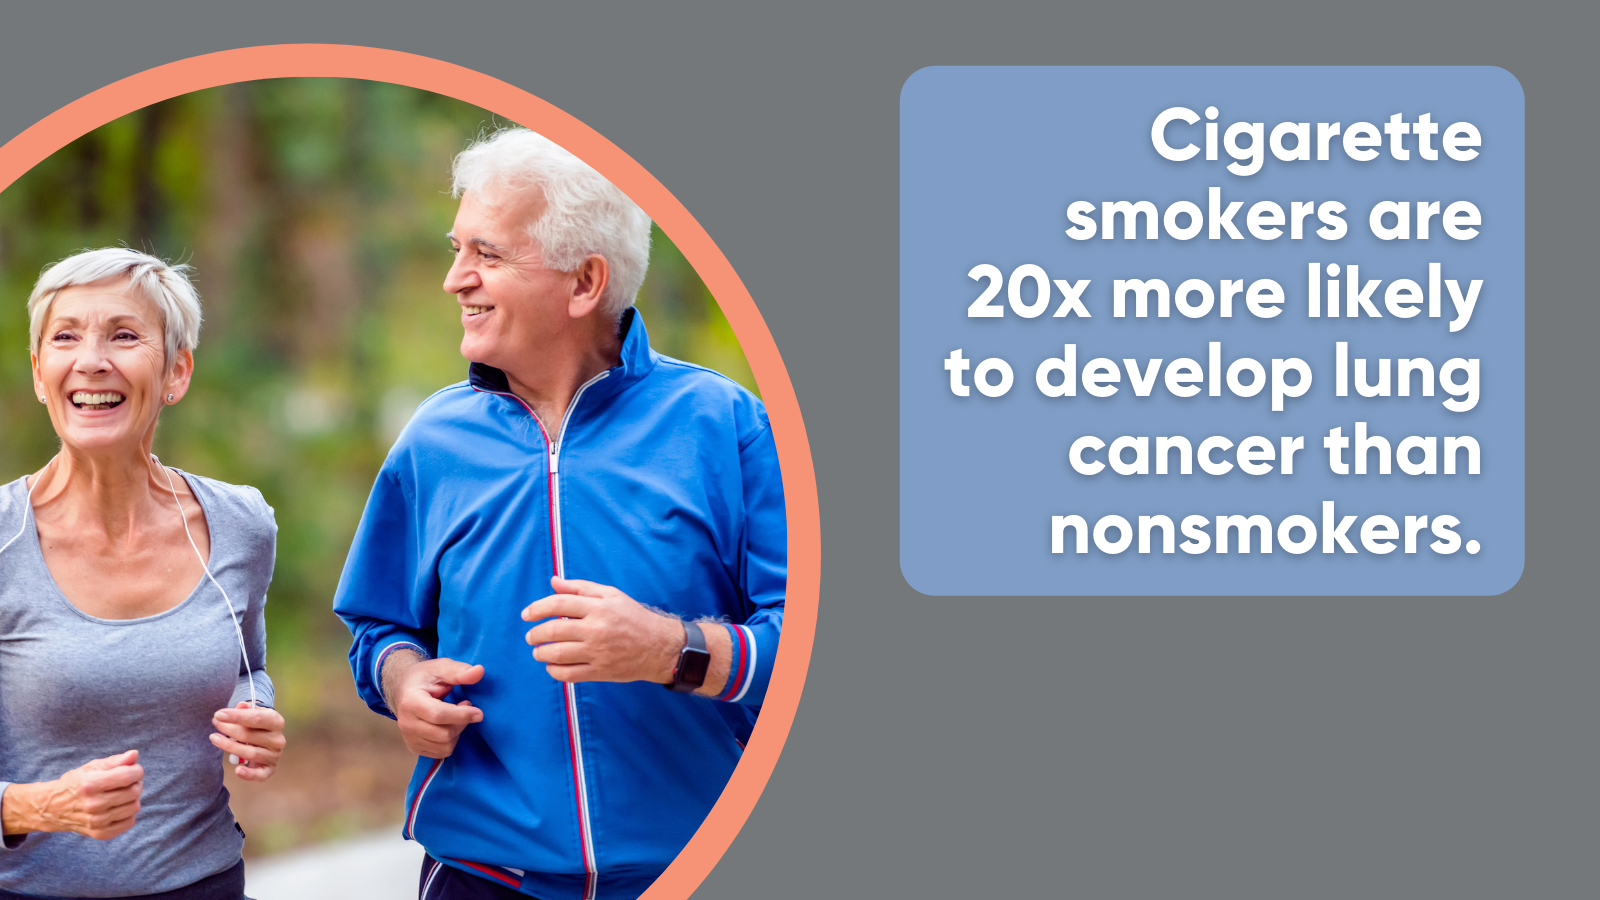 Cigarette smokers are 20 times more likely to develop lung cancer than nonsmokers.